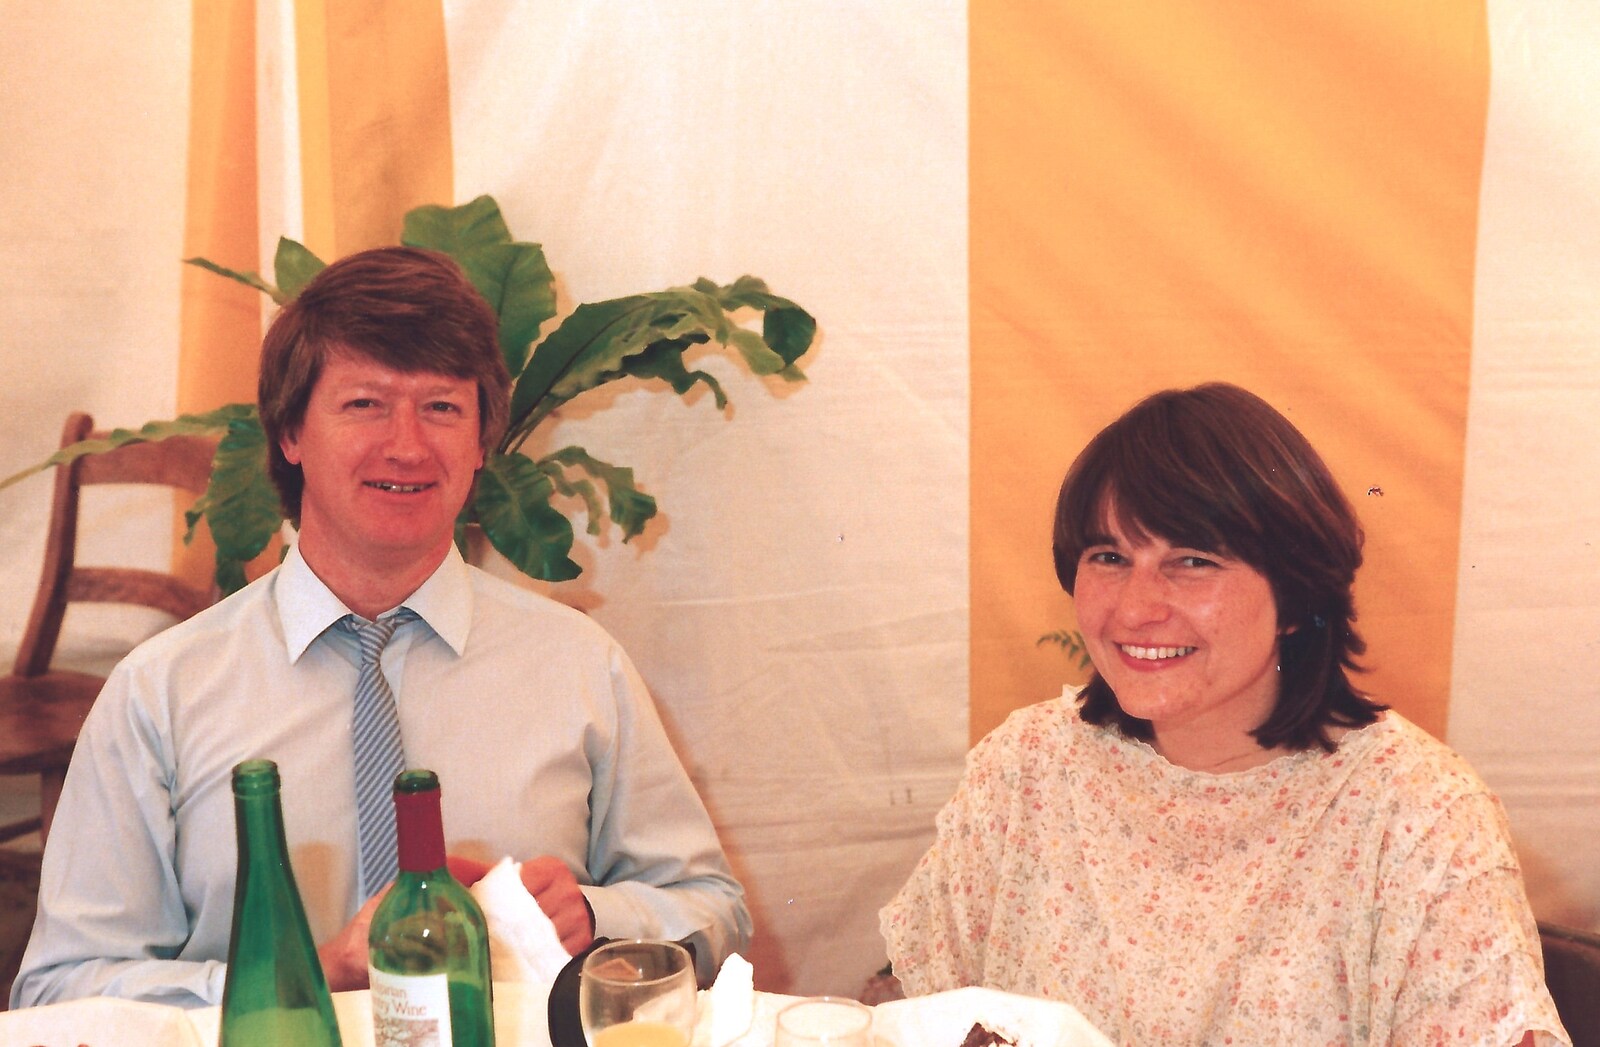 Neil and Caroline from Mother and Mike's Wedding Reception, Bransgore, Dorset - 20th August 1988